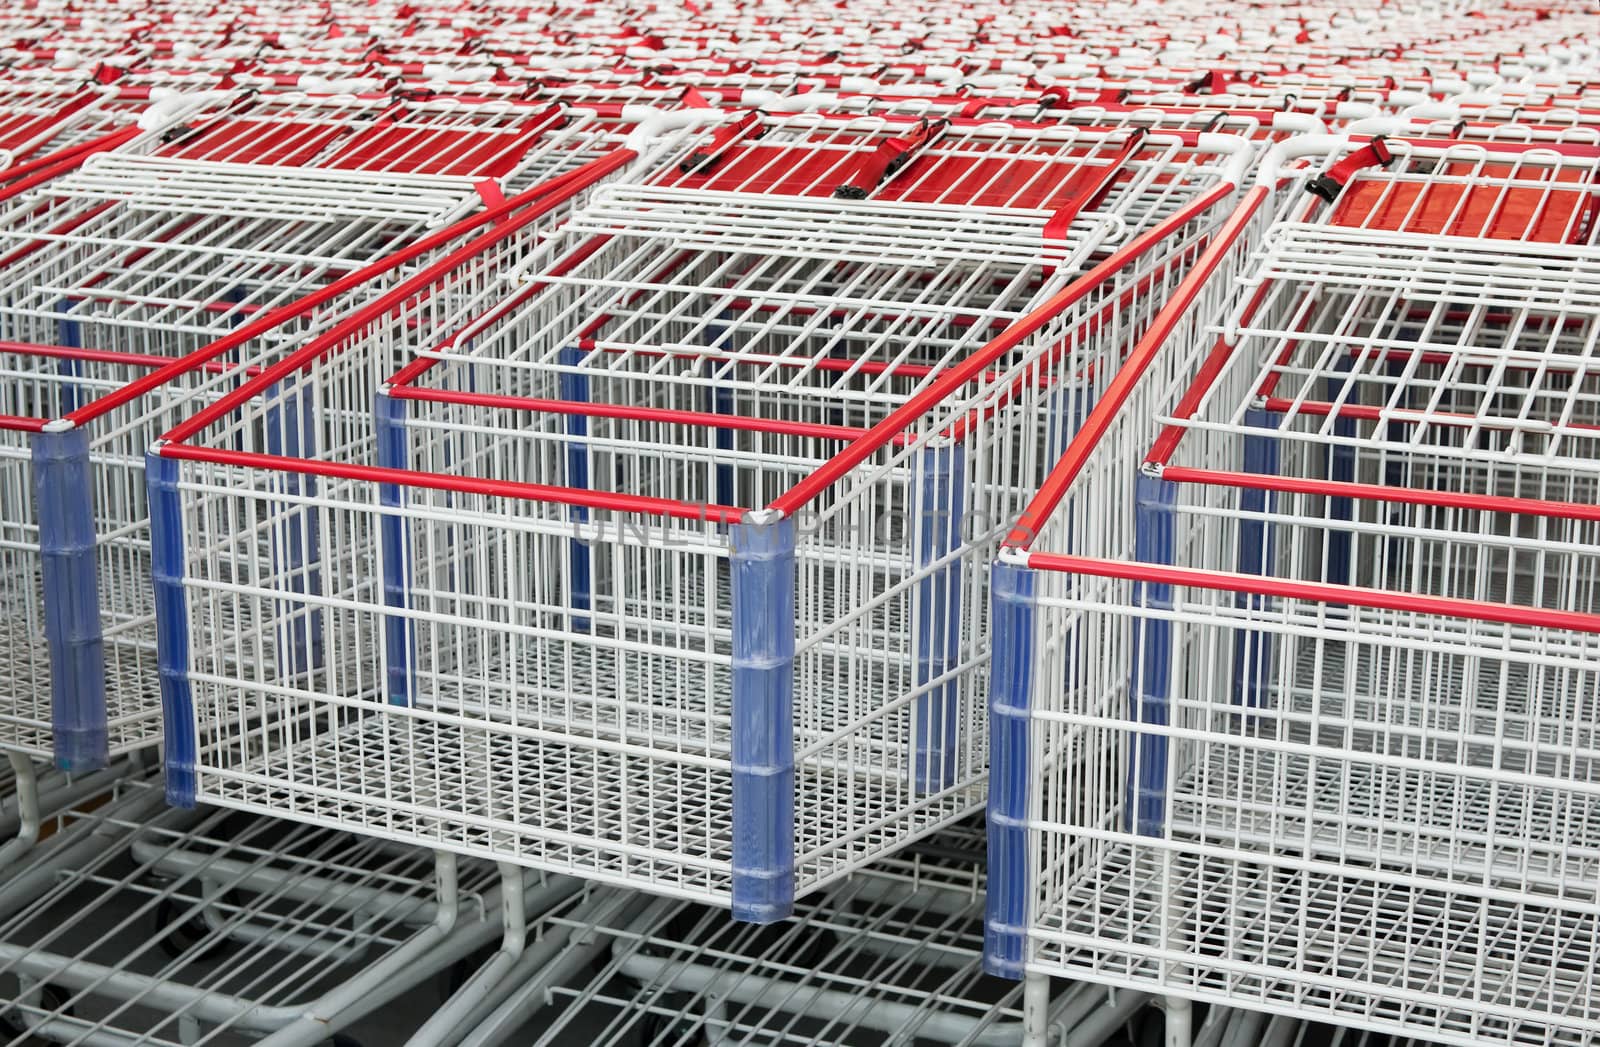 American shopping carts that are stacked together.